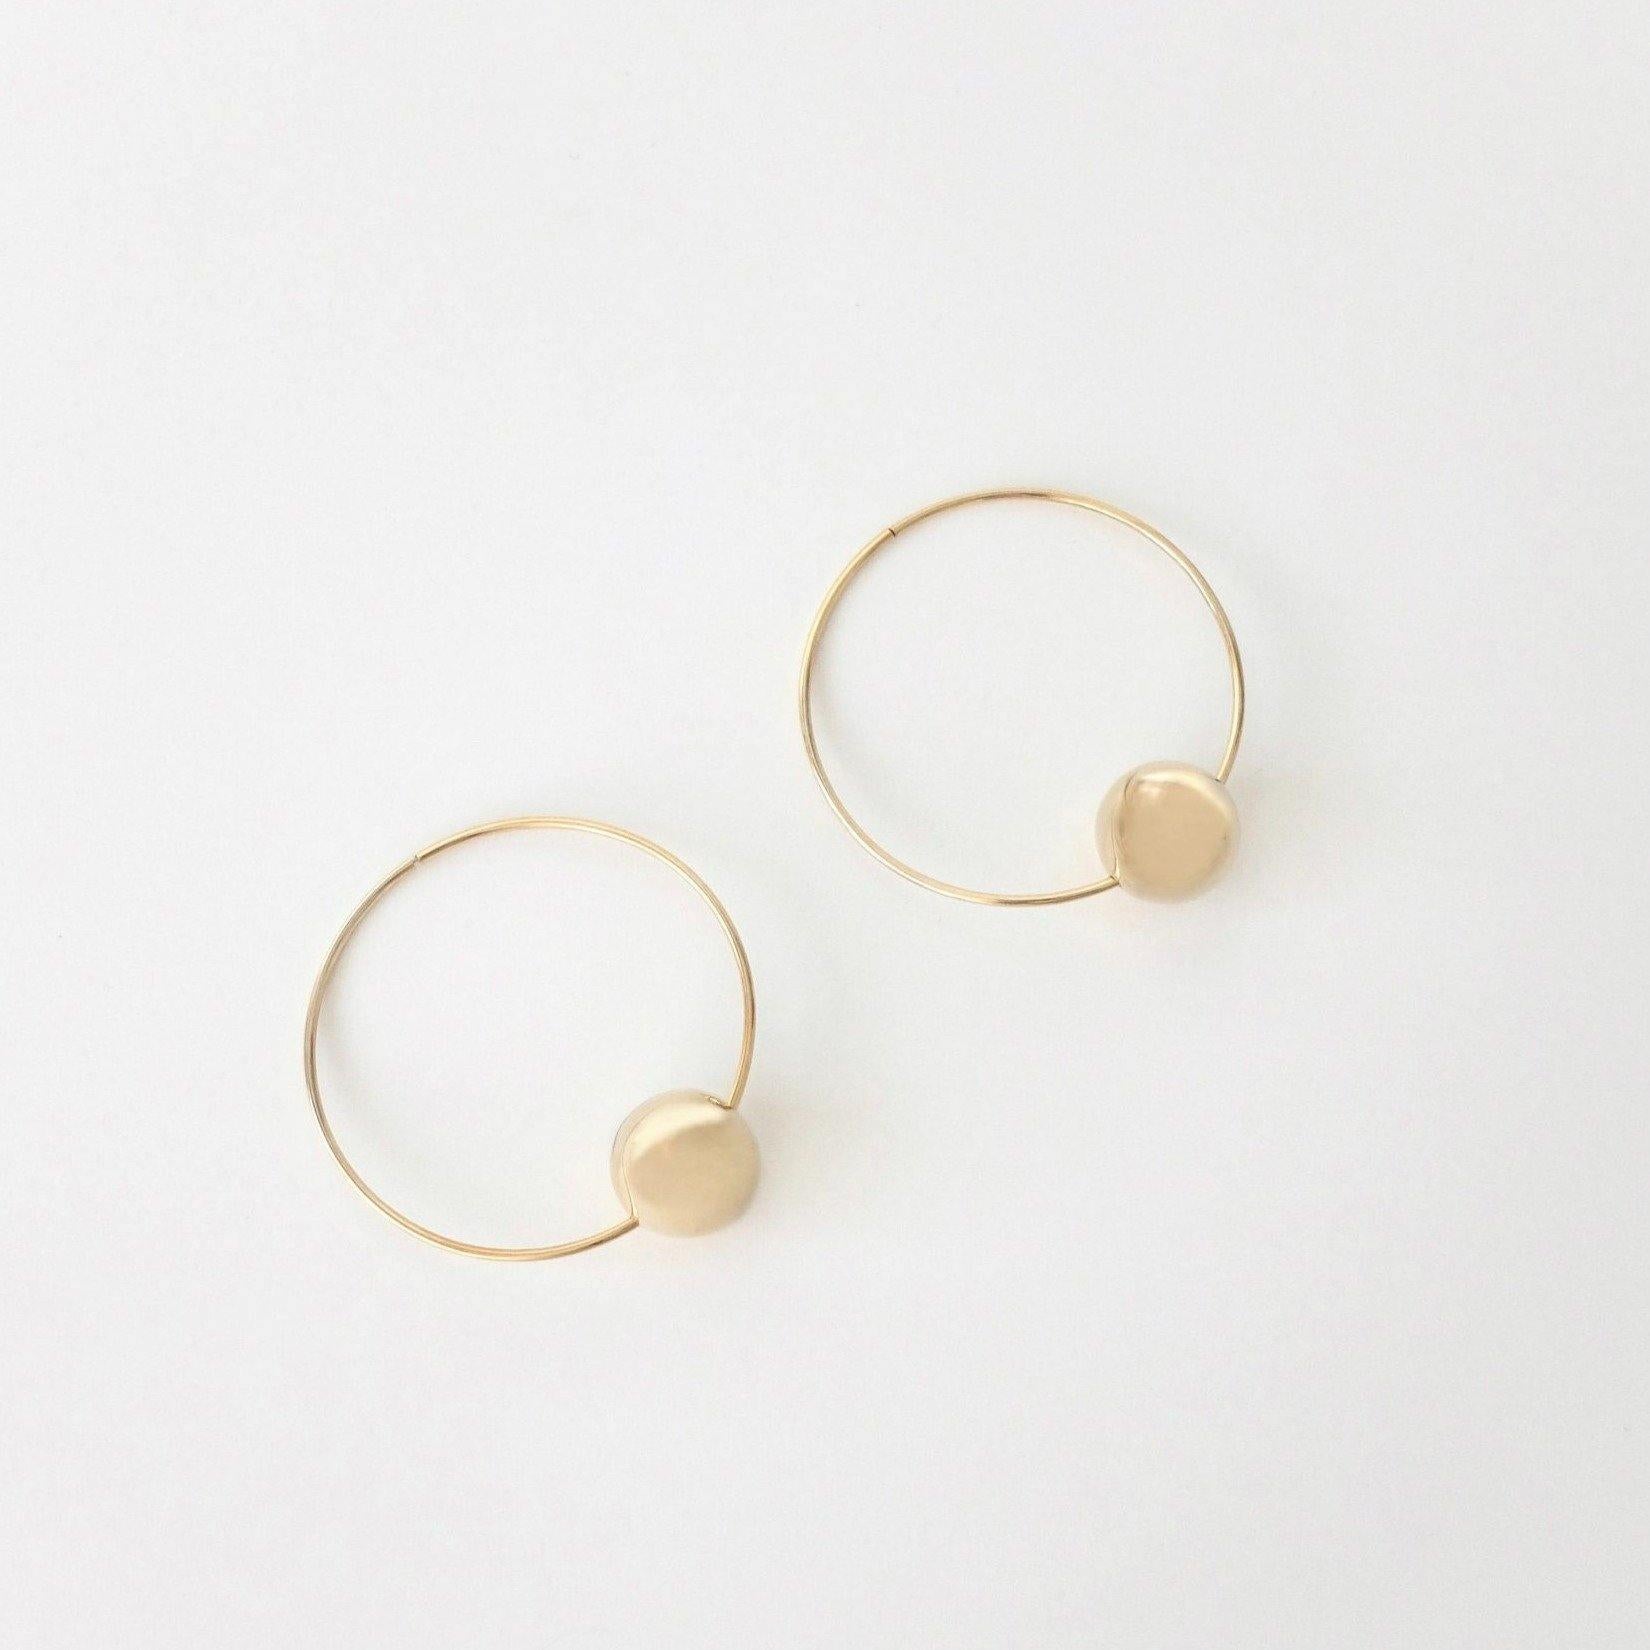 Hoop earrings, 925 sterling silver, 18 kt. gold plated, Bulle In New Condition For Sale In Capri, IT